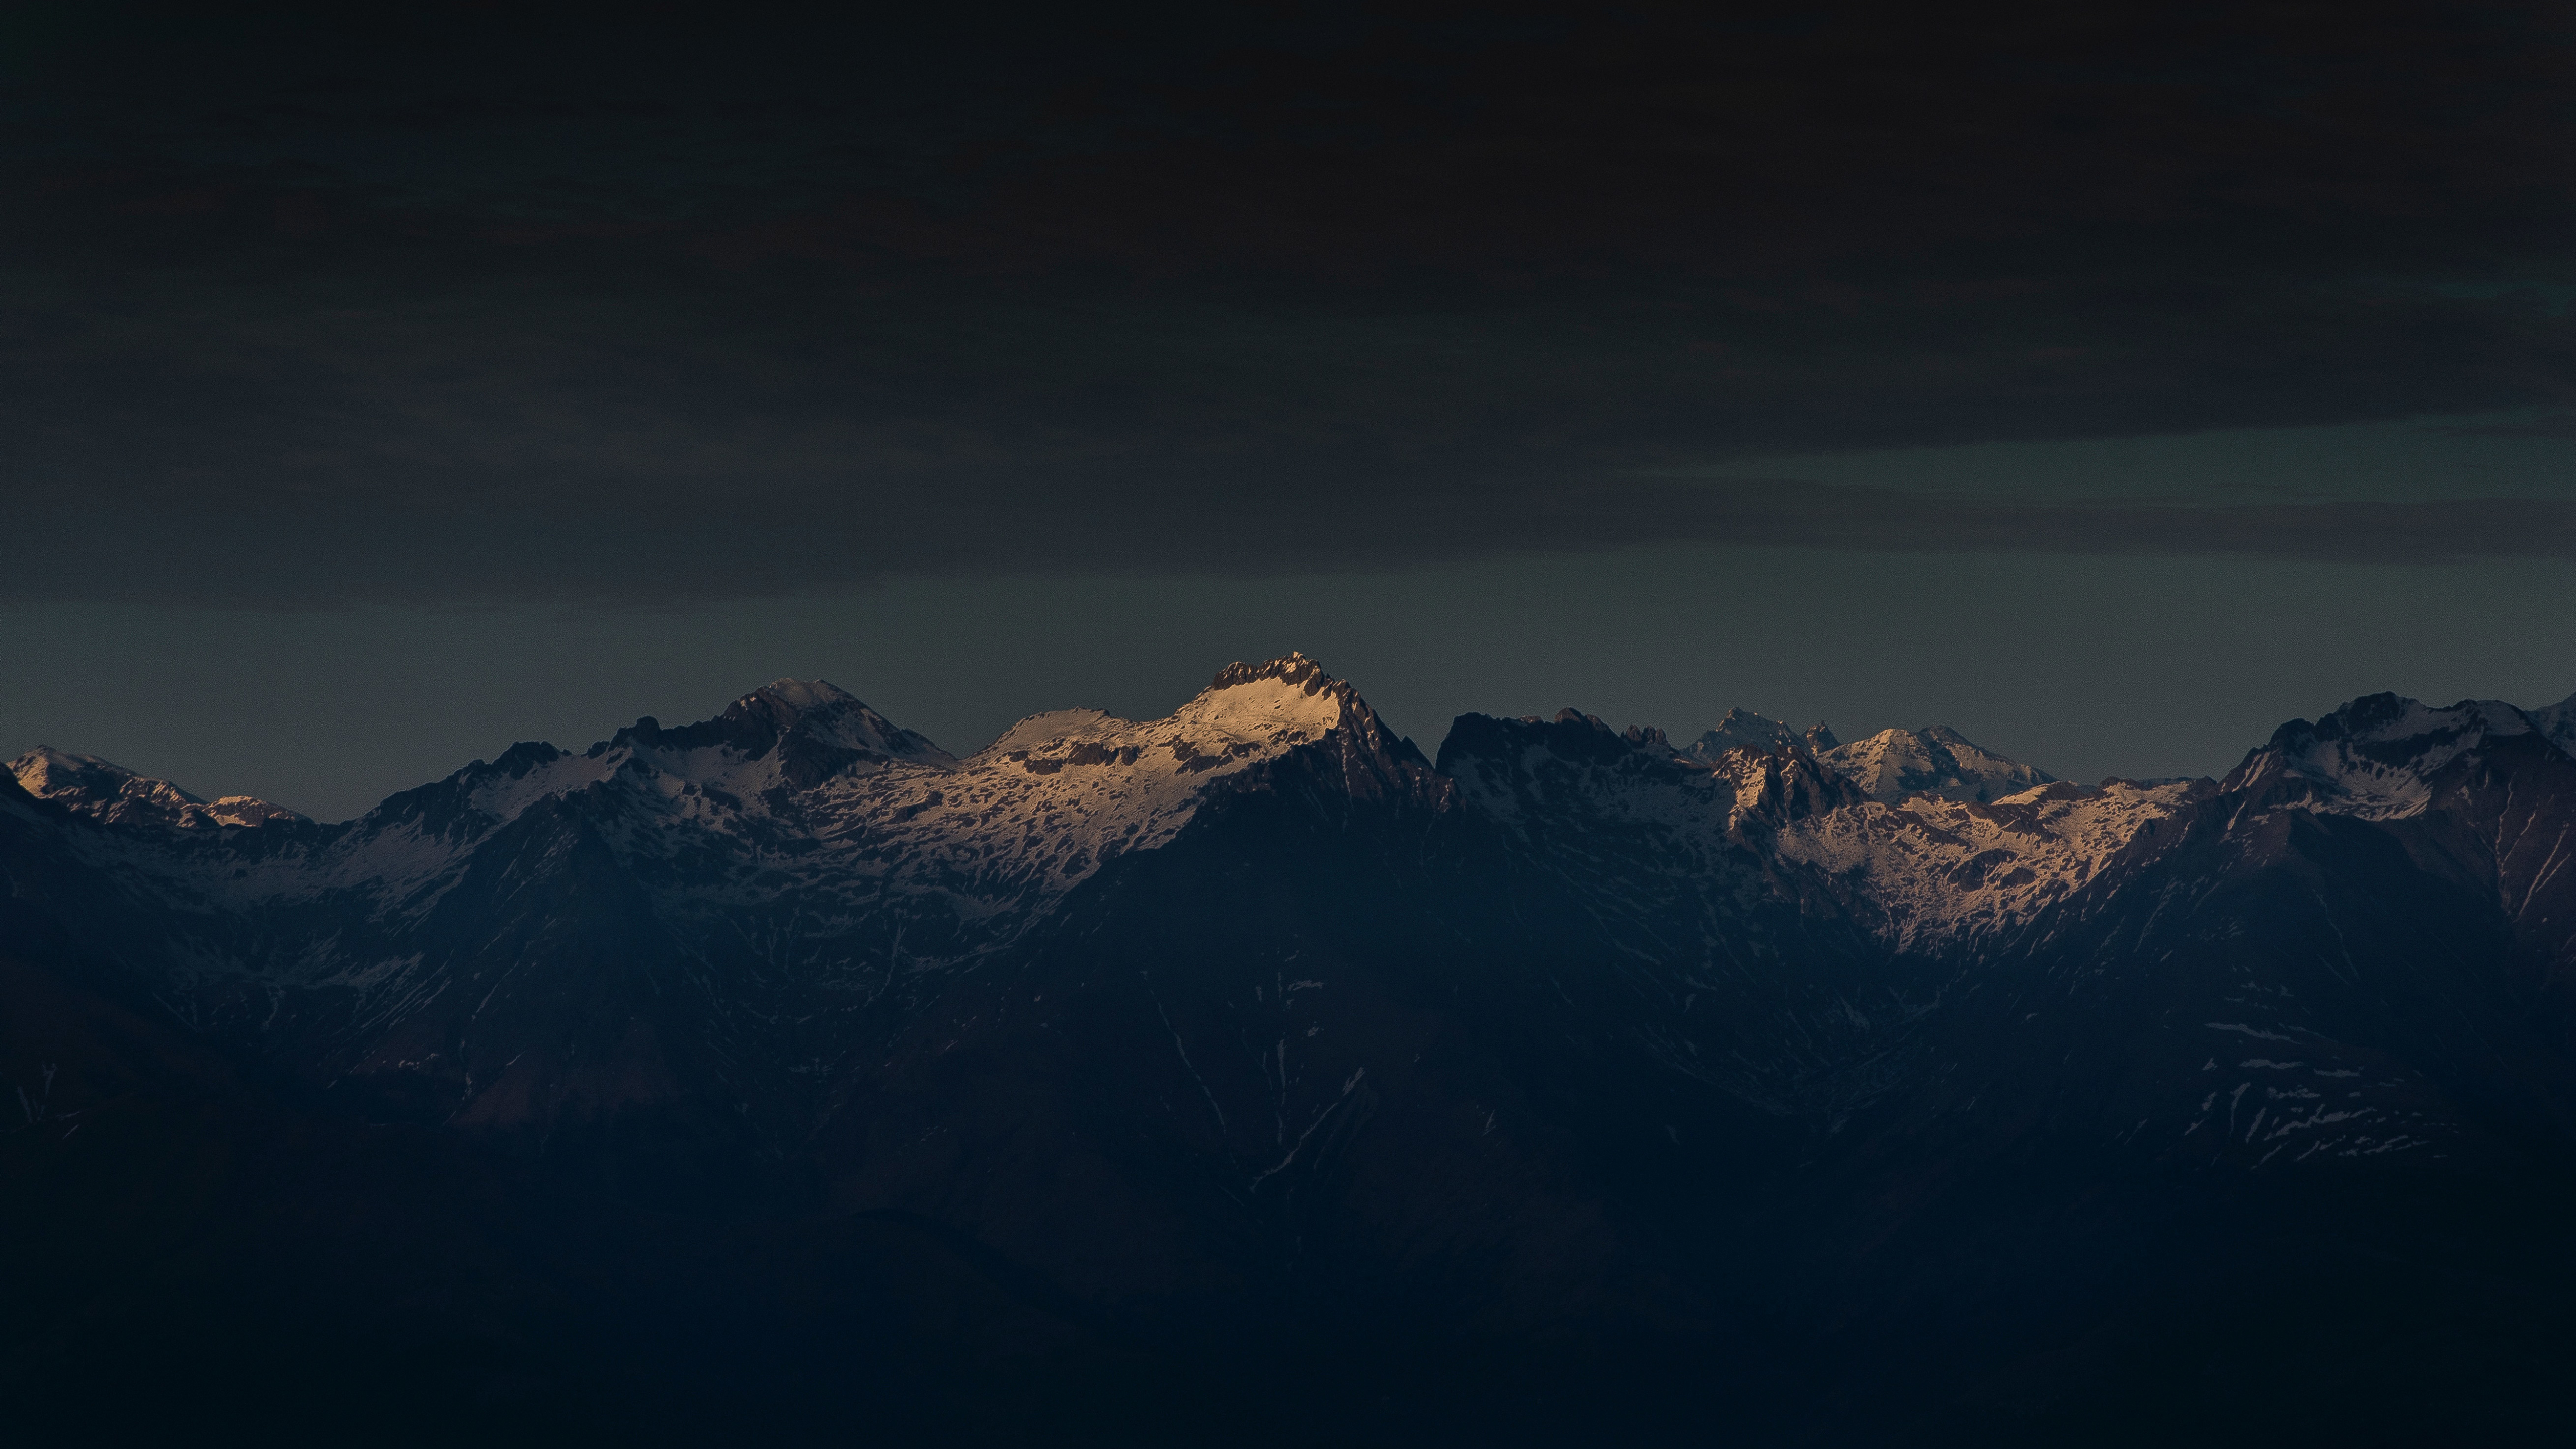 5120x2880 Resolution Clean Night Sky And Mountains Peak 5k Wallpaper